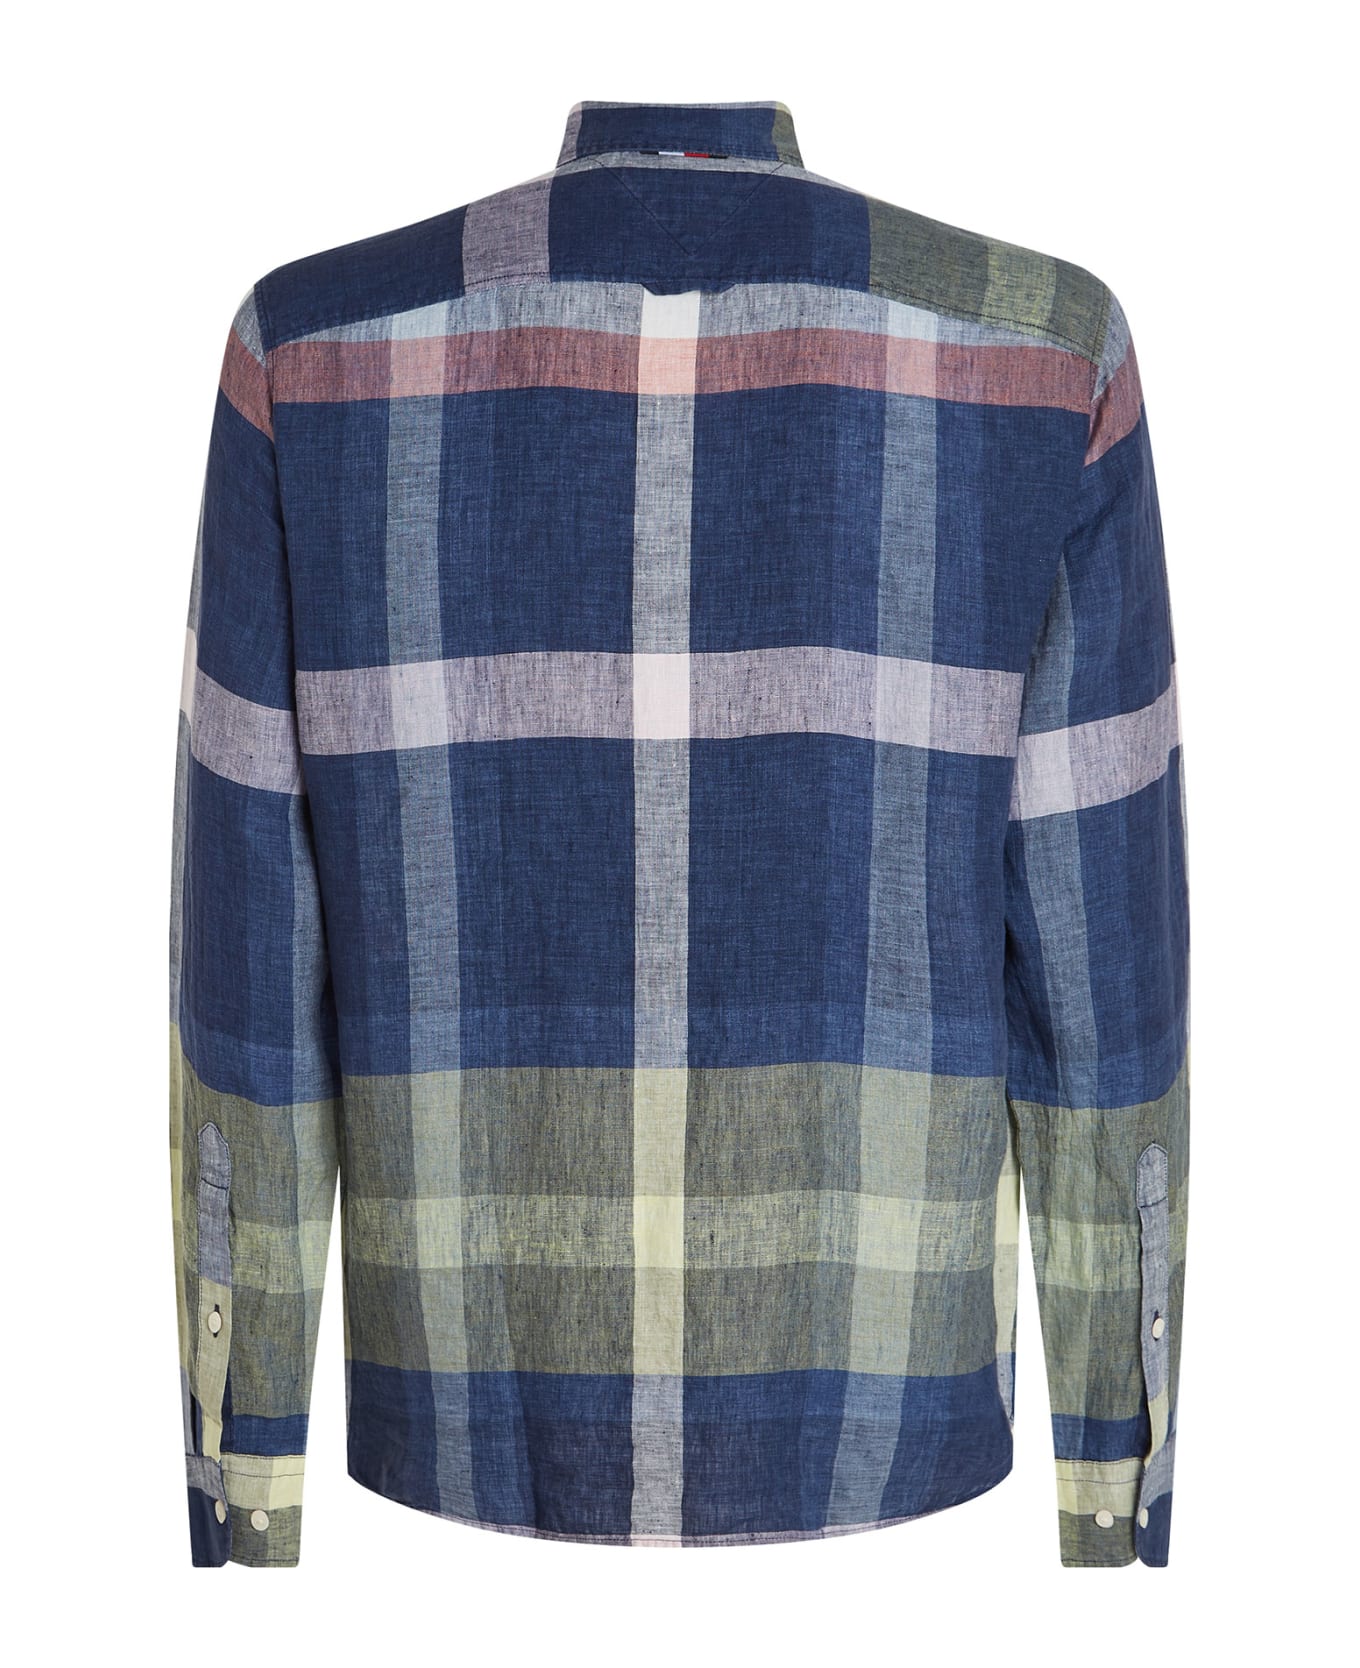 Tommy Hilfiger Multicolored Checked Shirt - CARBON NAVY/MULTI シャツ